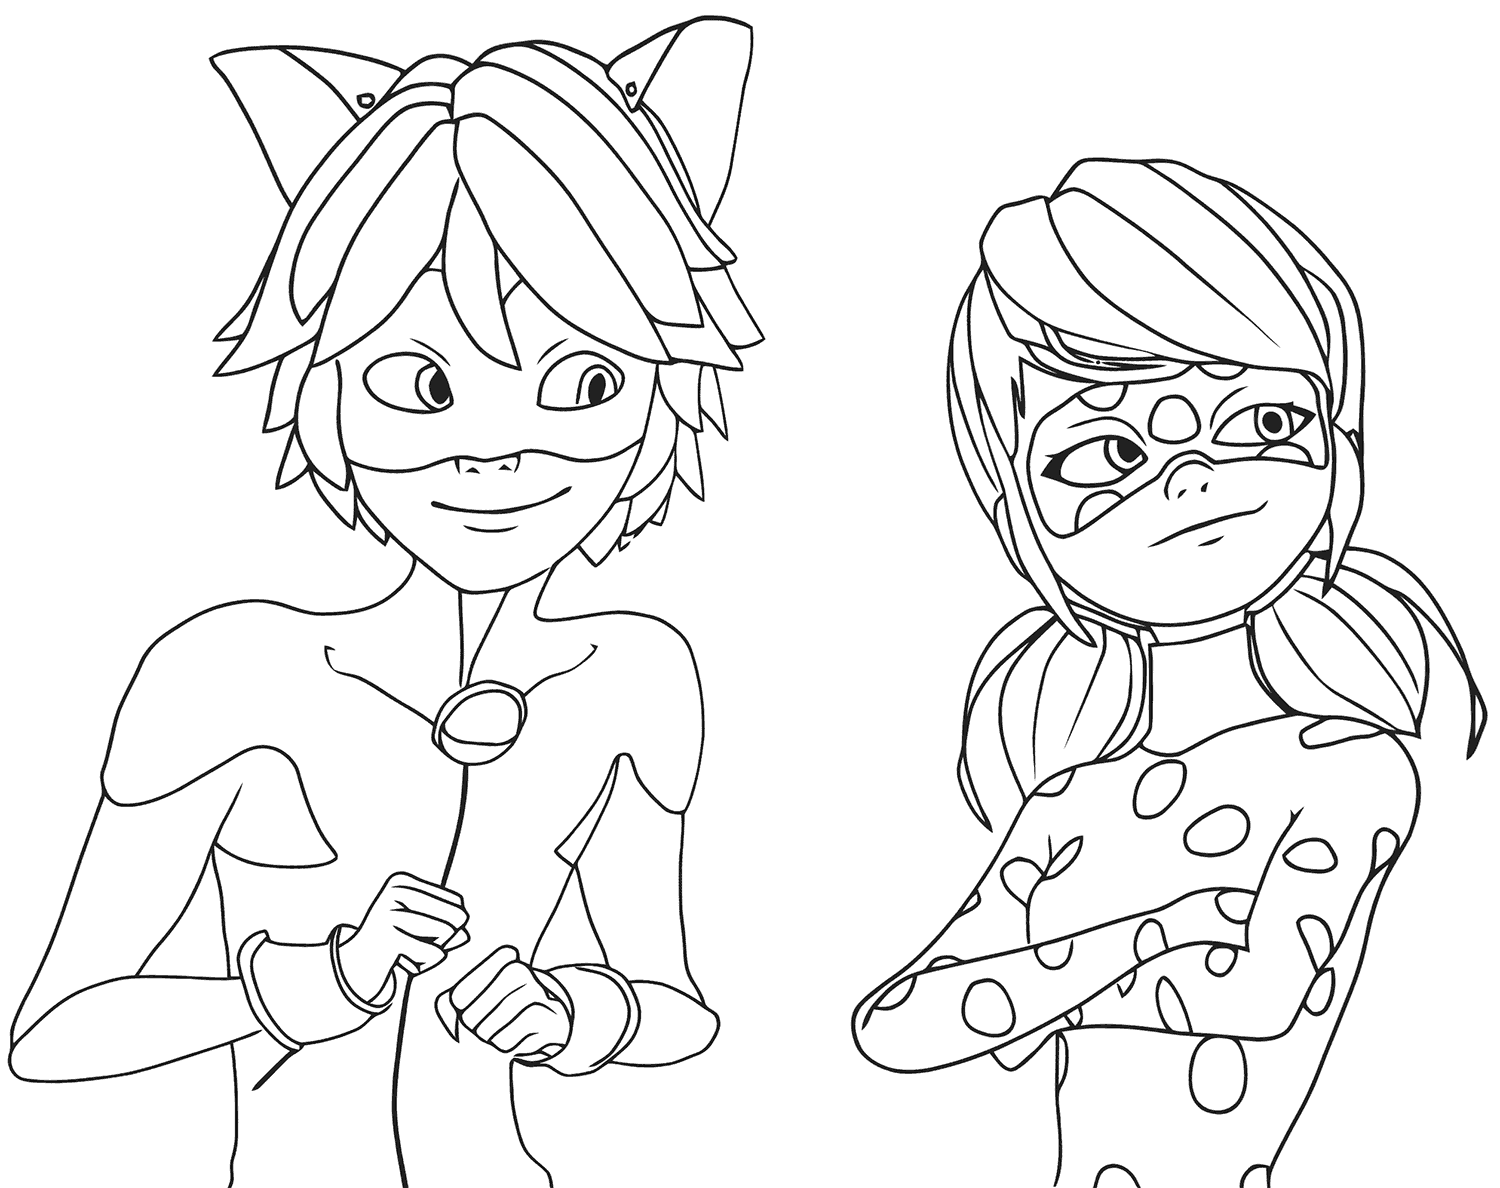 Marinette Coloring Pages to download and print for free